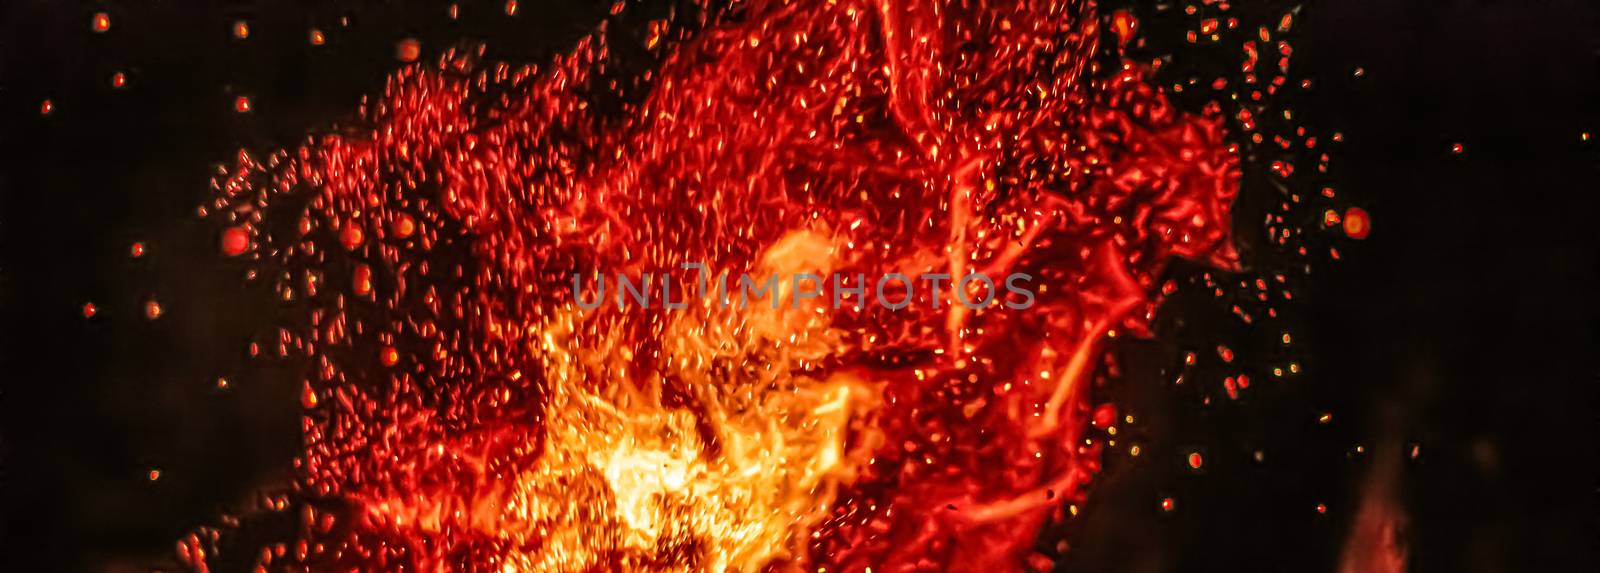 Hot fire flames as nature element and abstract background, minimal design